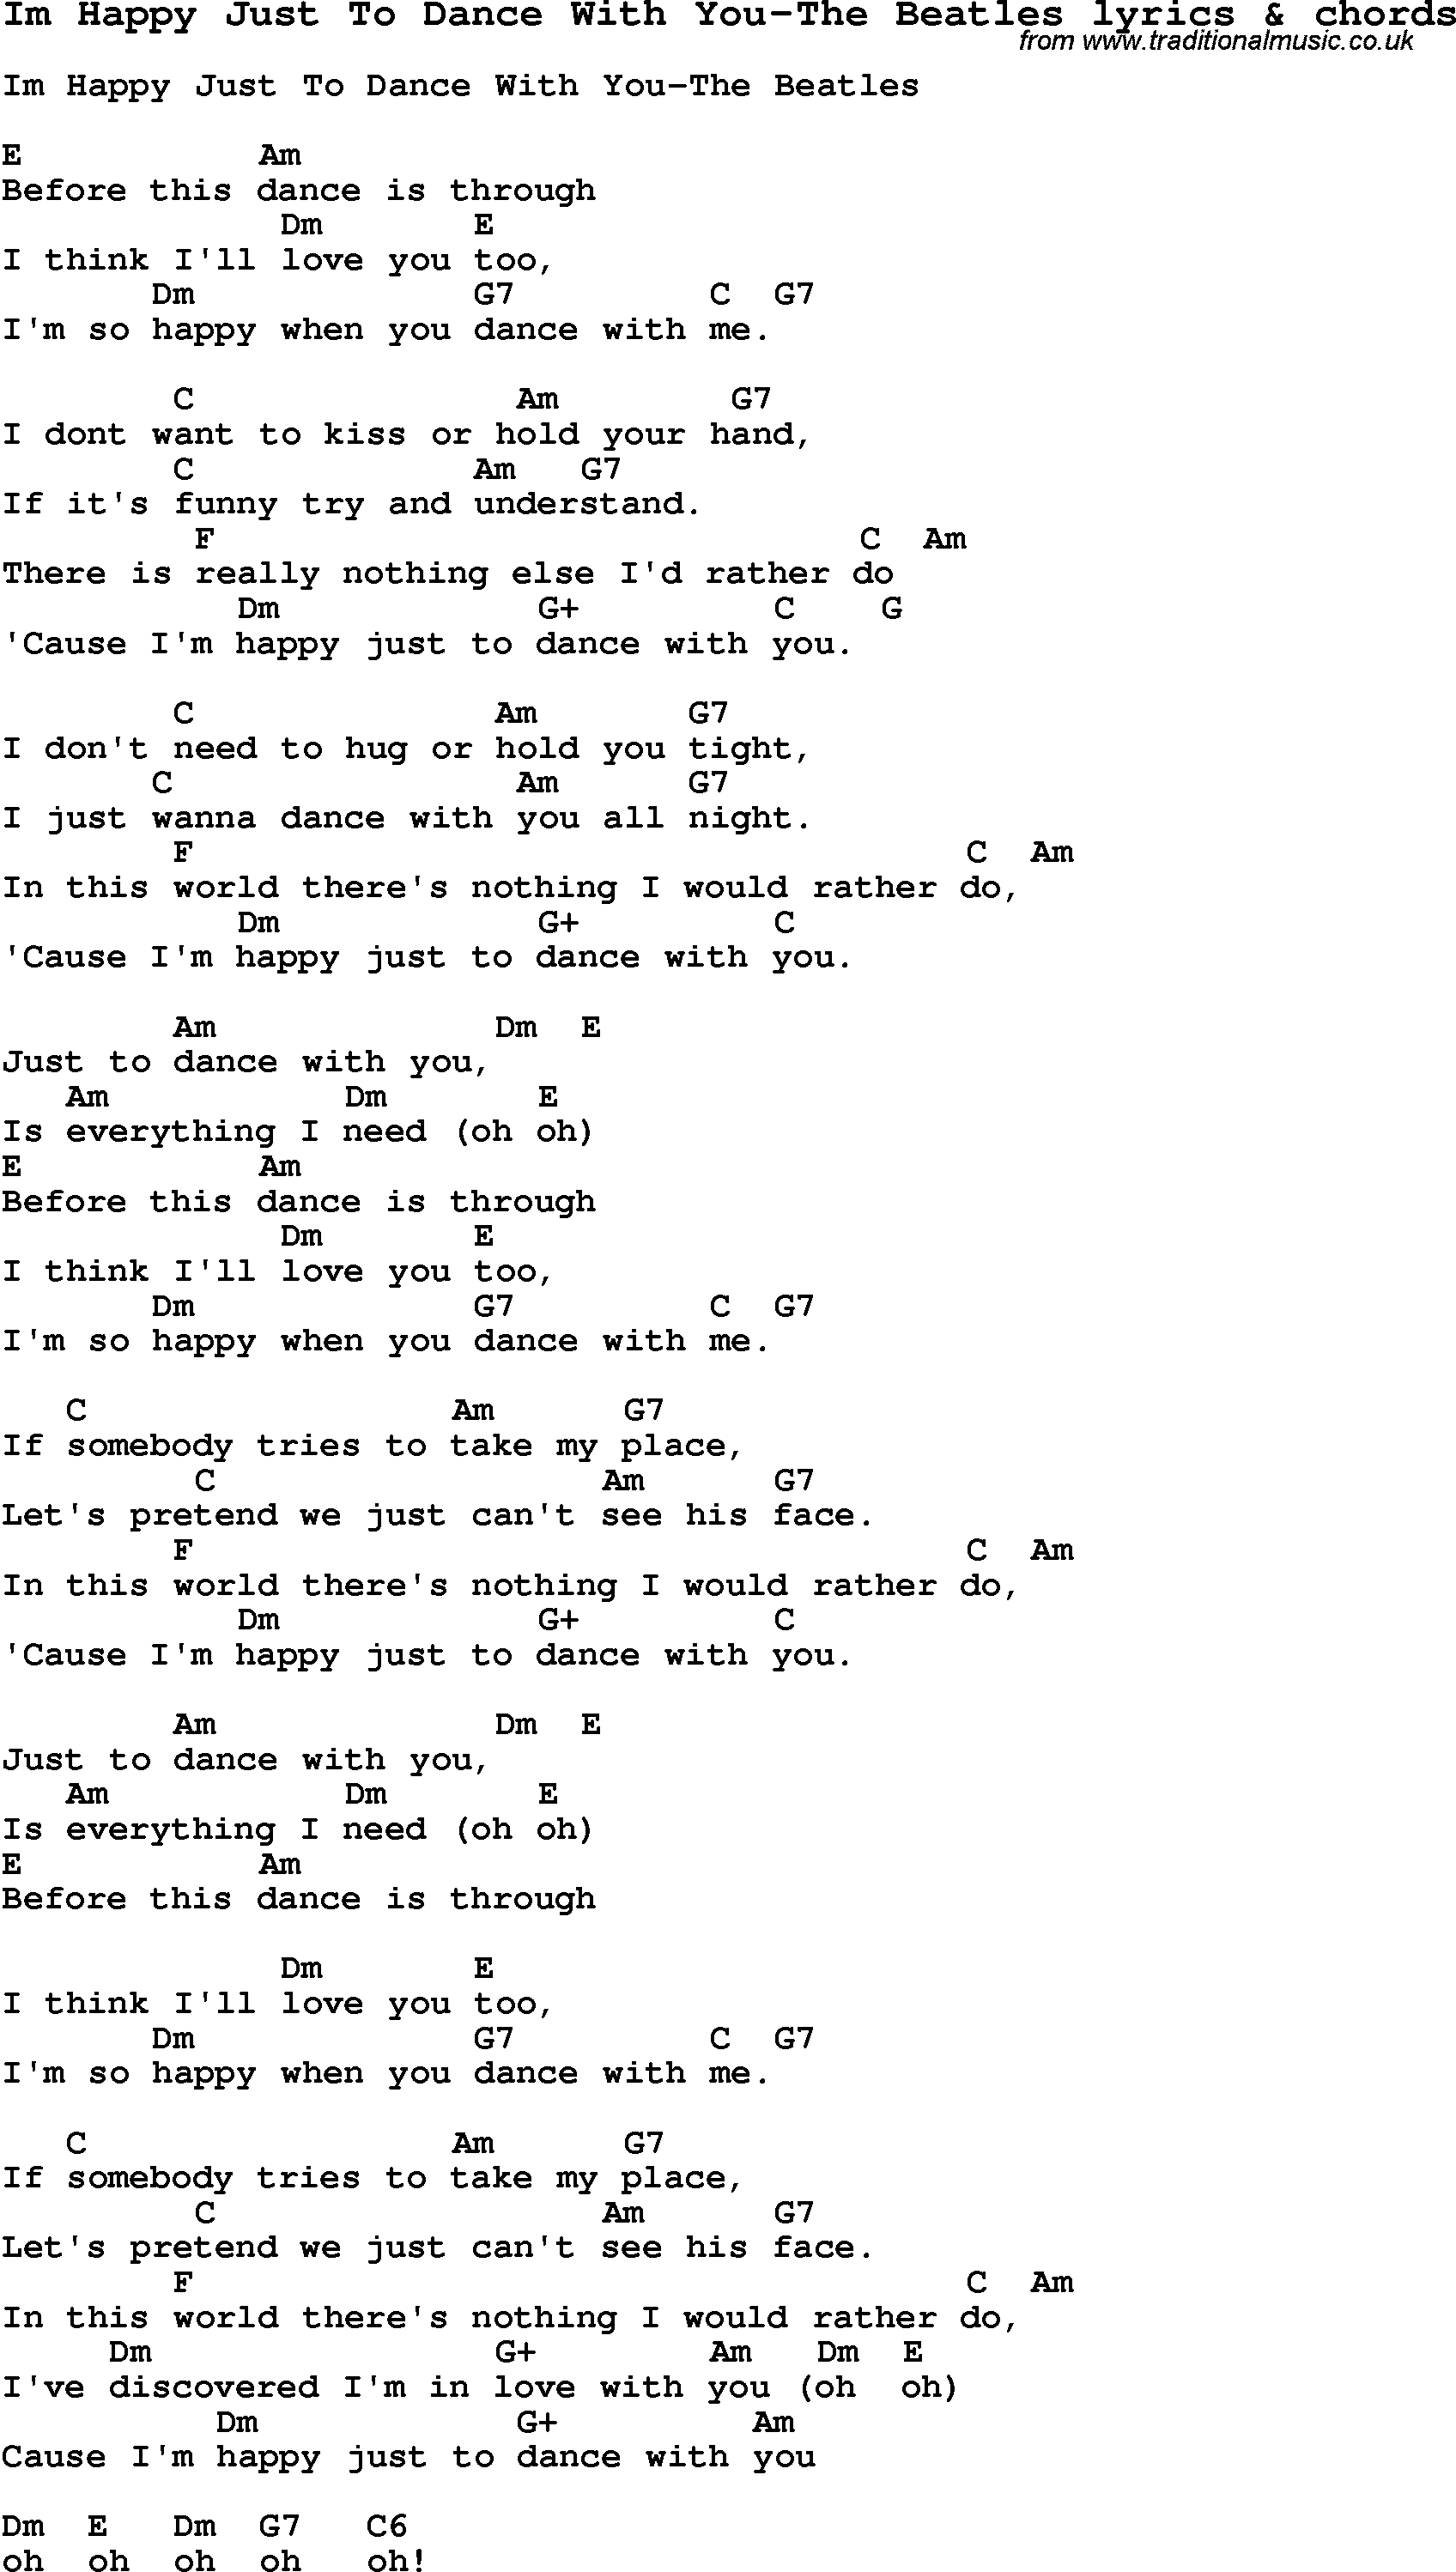 Love Song Lyrics for: Im Happy Just To Dance With You-The Beatles with chords for Ukulele, Guitar Banjo etc.